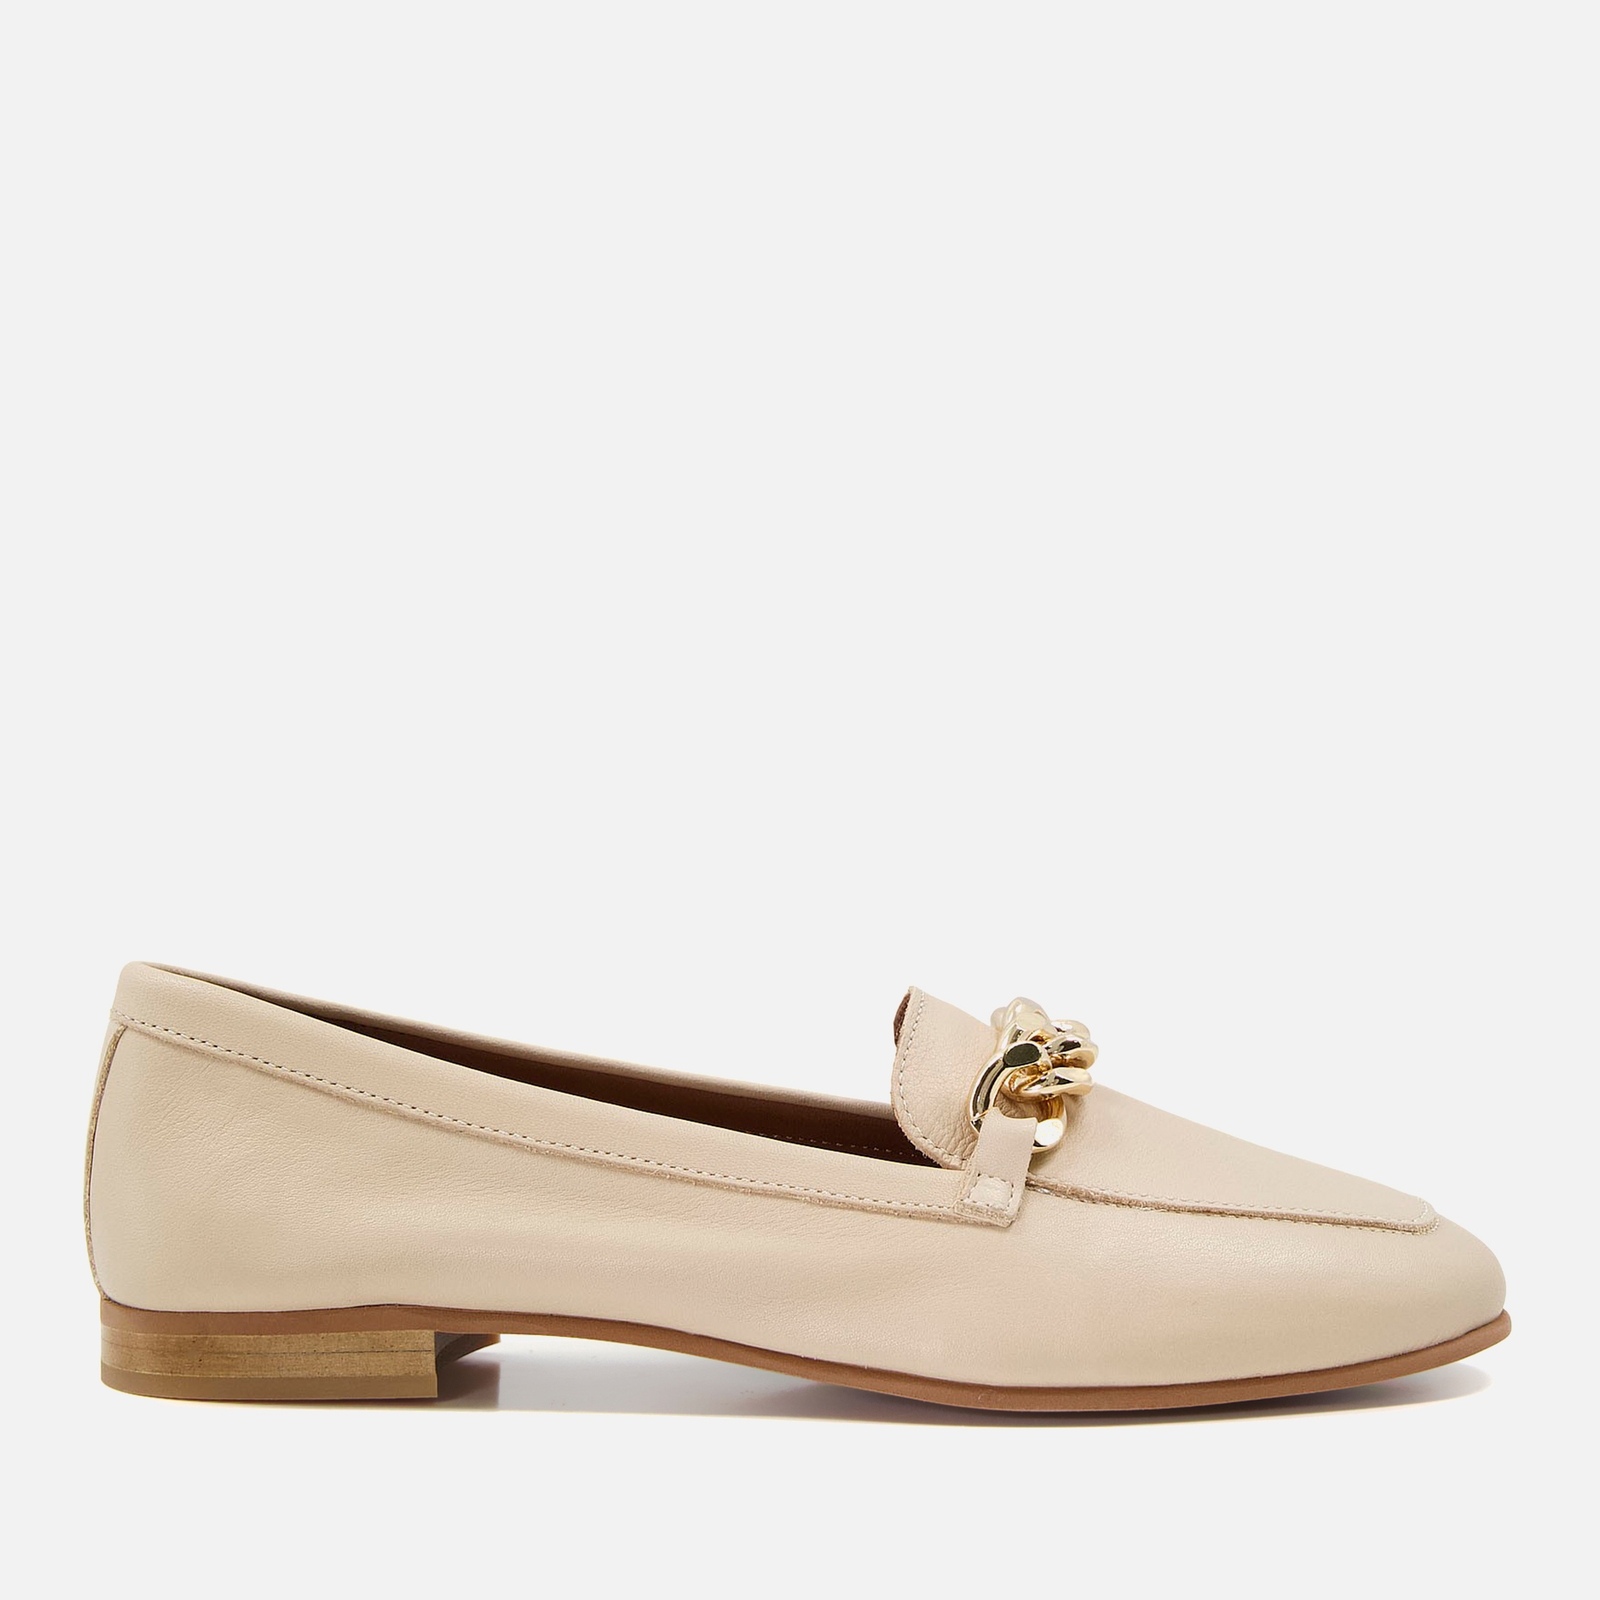 Dune Women's Goldsmith Leather Loafers